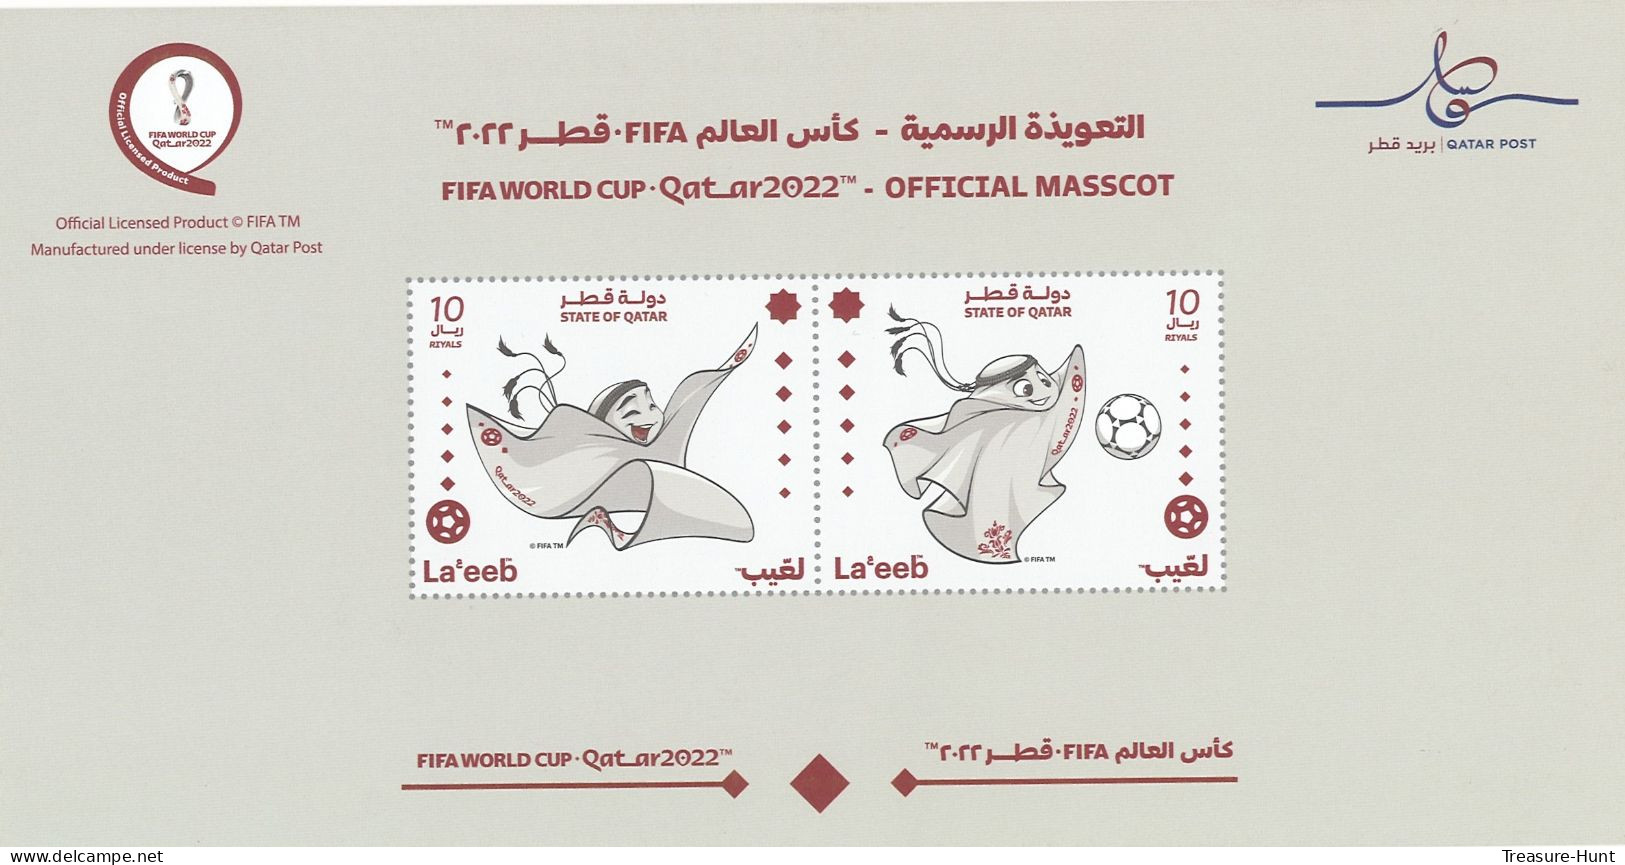 All 11 New Stamp Issue Bulletin / Technical Details Brochure - QATAR 2022 FIFA World Cup Soccer Football - VERY RARE